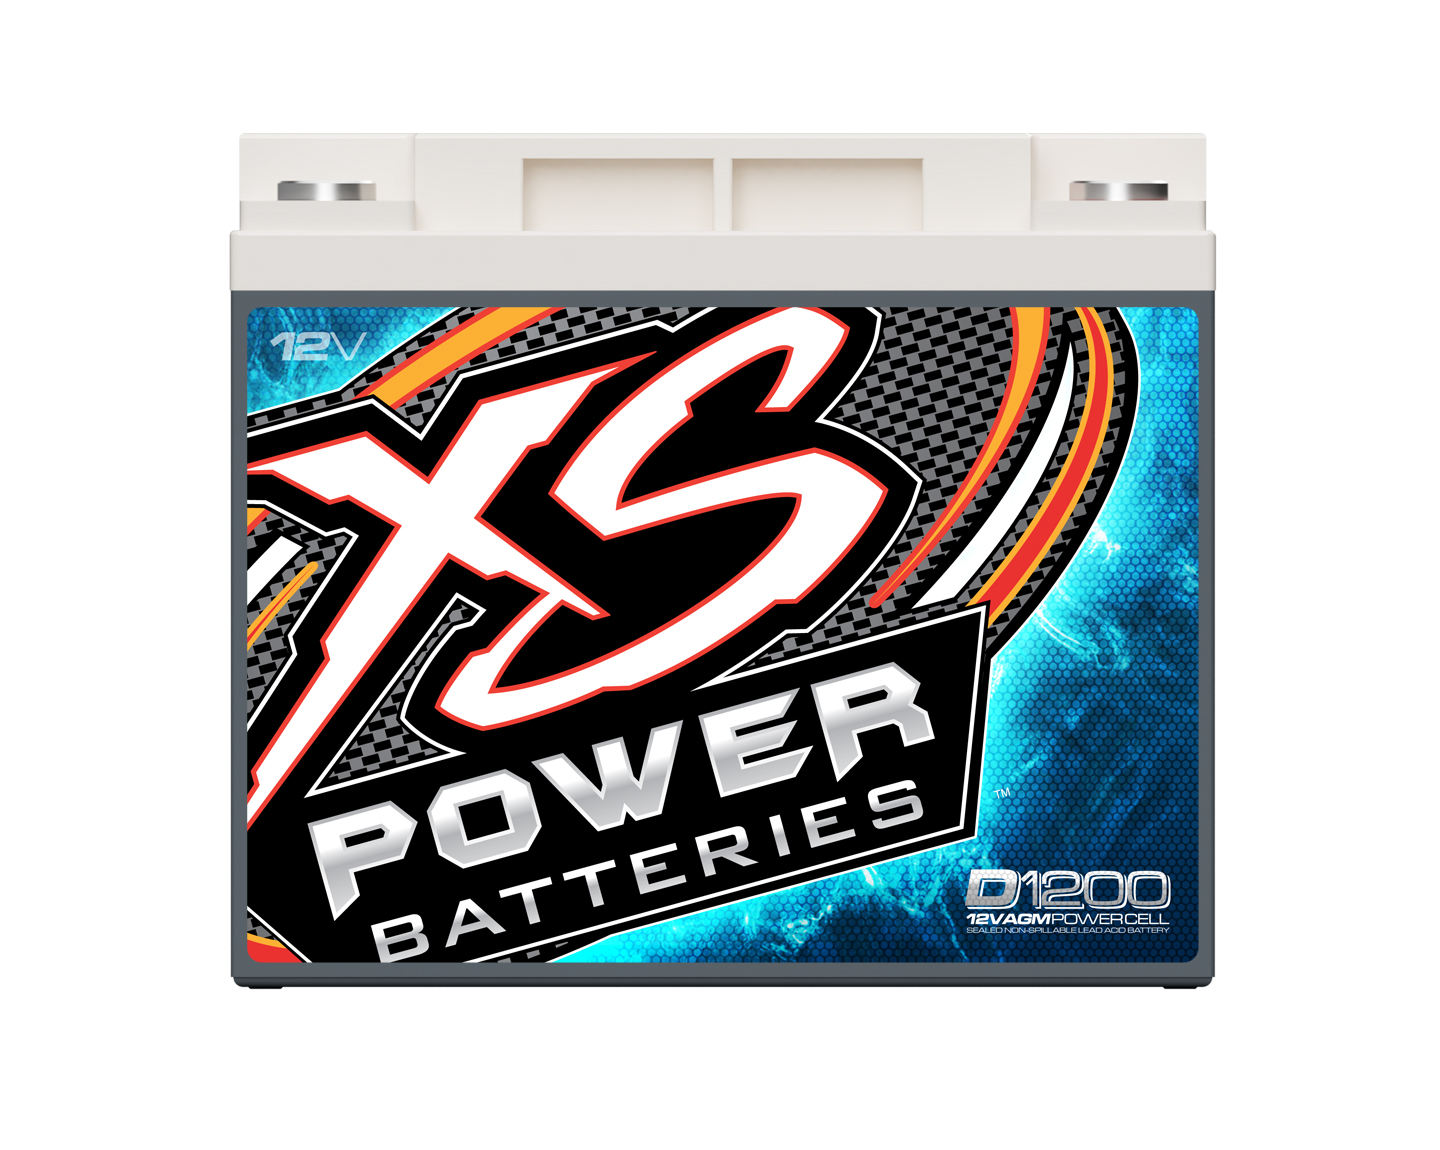 would this battery work as a second battery for a 2500 watt system on the same alternater on a 2002 honda accord